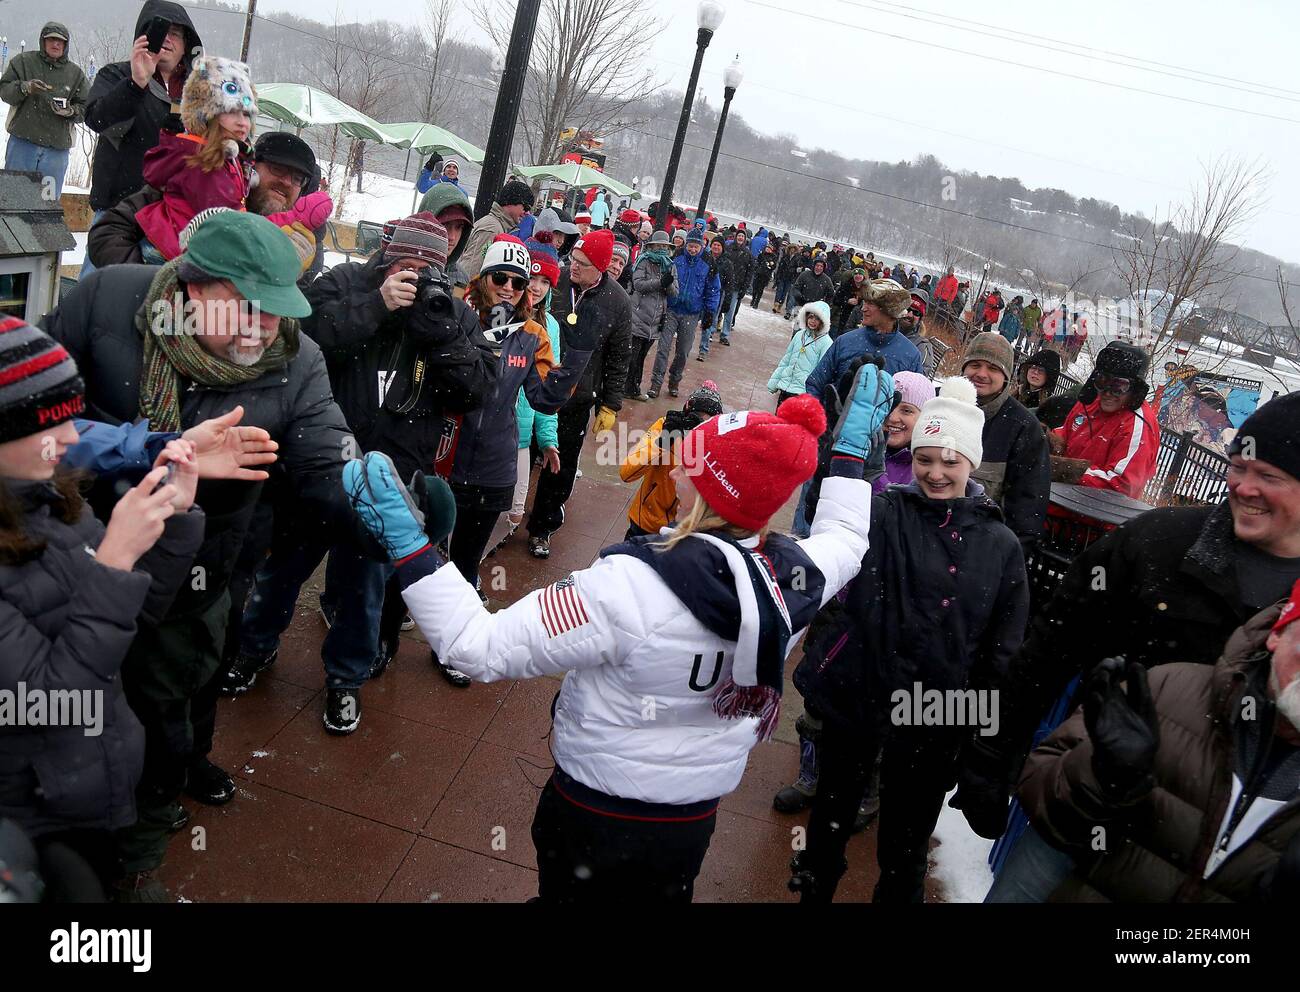 Jessie Diggins, Team USA Olympic gold medalist cross country skier, high-fives fans as hundreds brave snowy, blustery weather to honor Diggins with a parade on Saturday, April 14, 2018, in Stillwater, Minn. (Photo by David Joles/Minneapolis Star Tribune/TNS/Sipa USA) Stock Photo